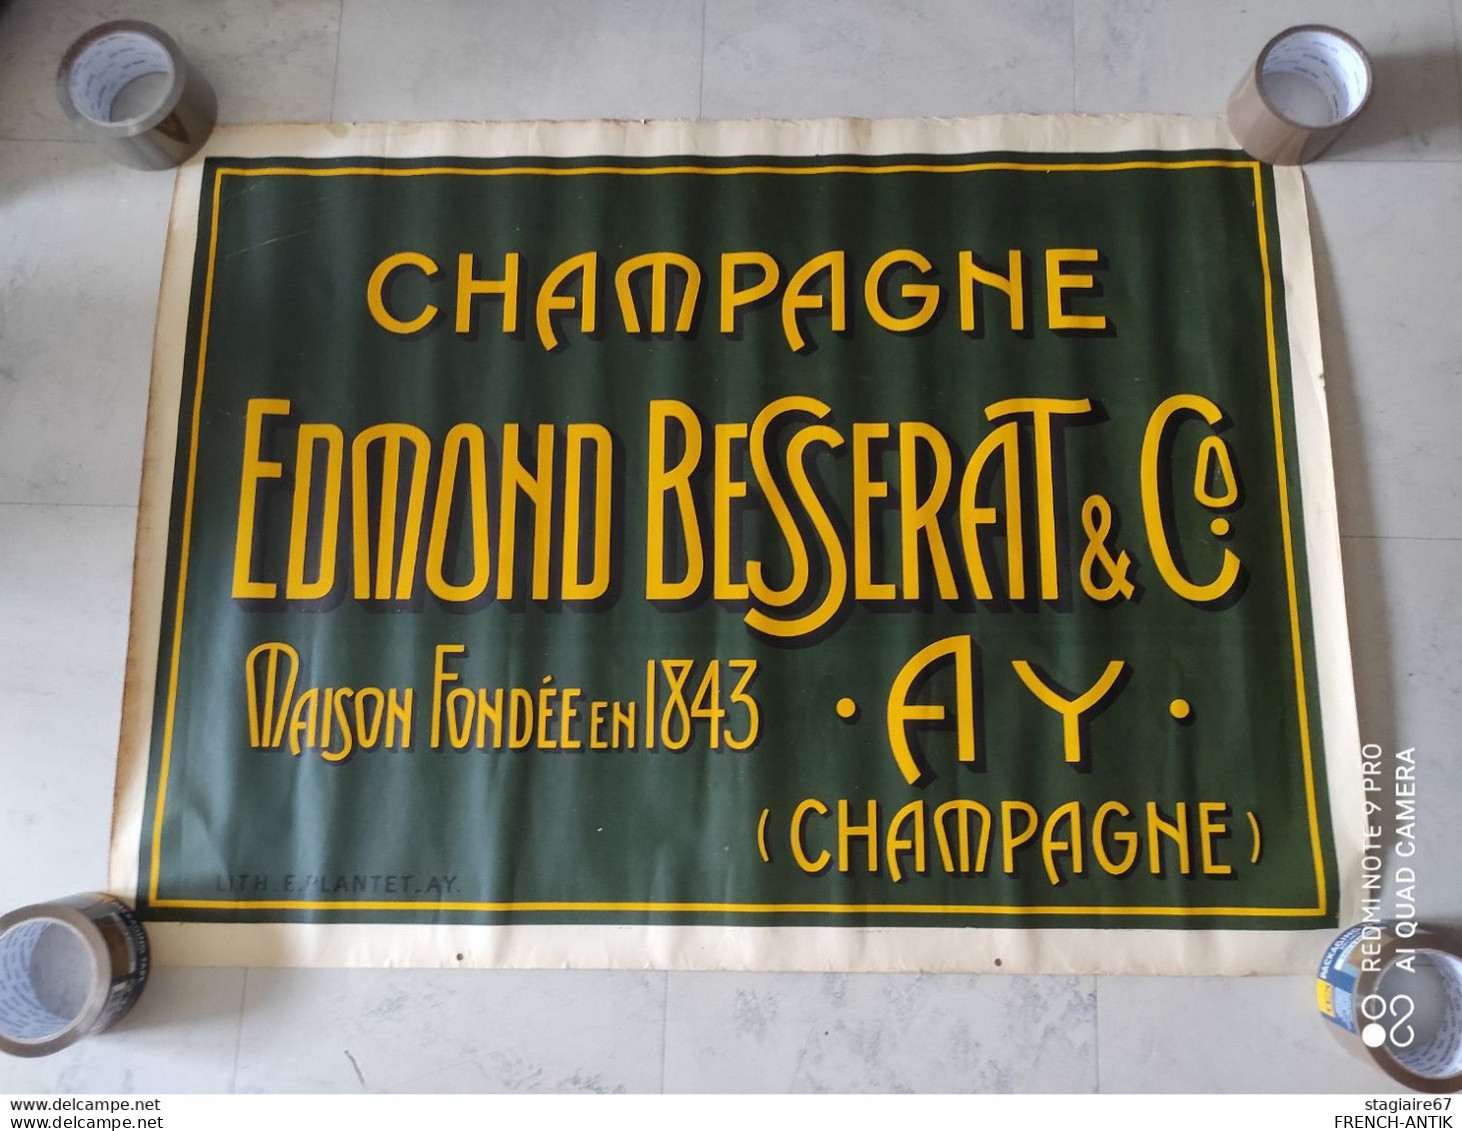 RARE AFFICHE CHAMPAGNE EDMOND BESSERAT AND CO AY MARNE FONDEE EN 1843 90X65CM - Affiches